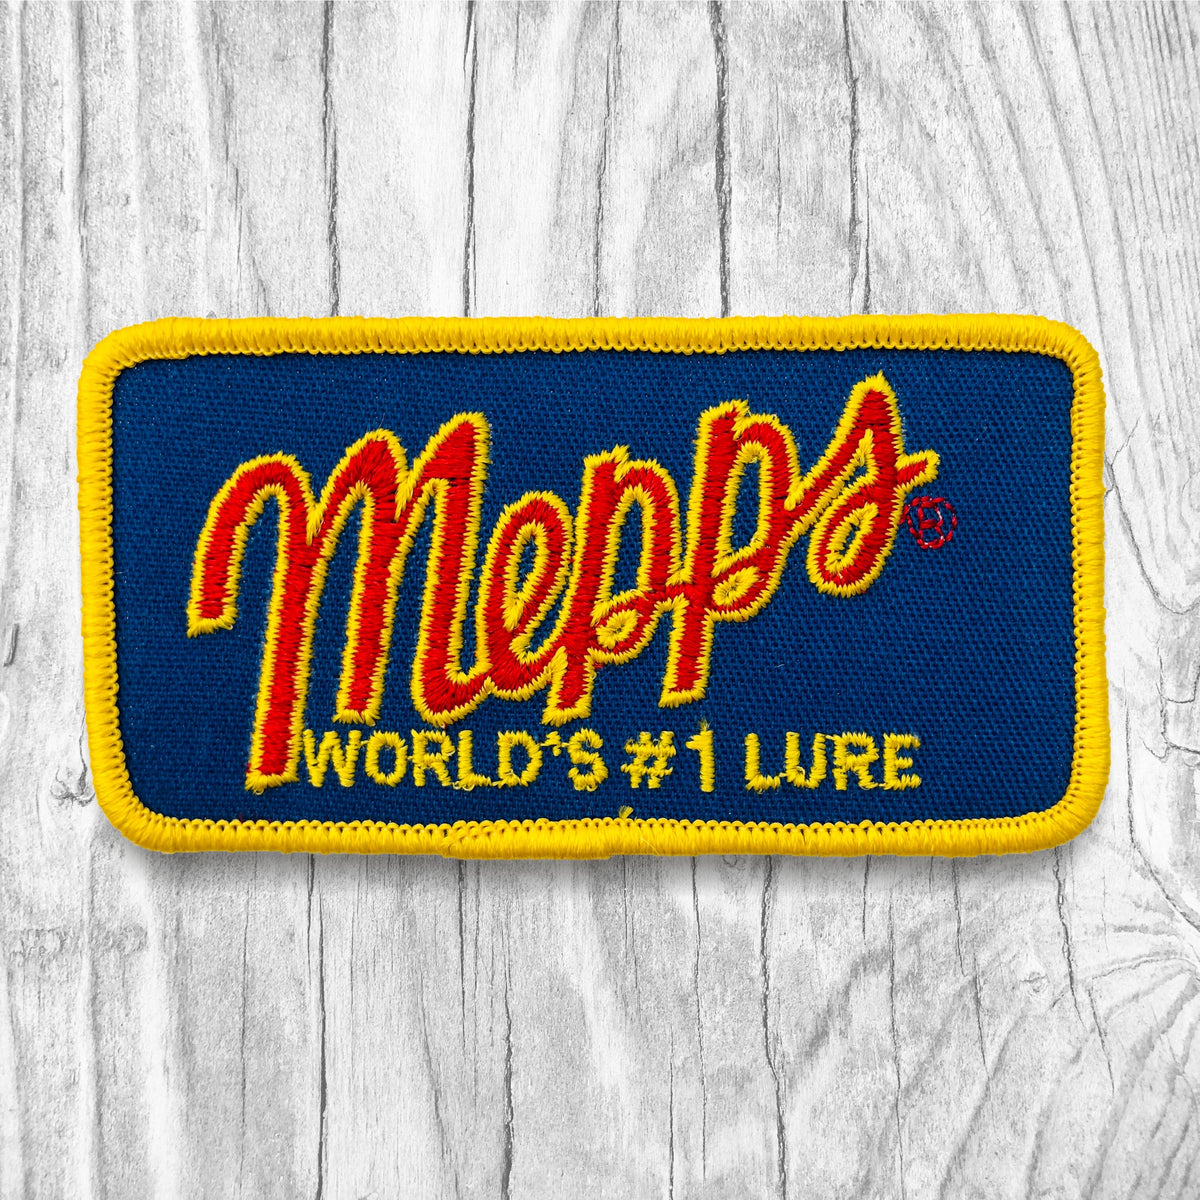 Mepps. Authentic Vintage Patch – Megadeluxe